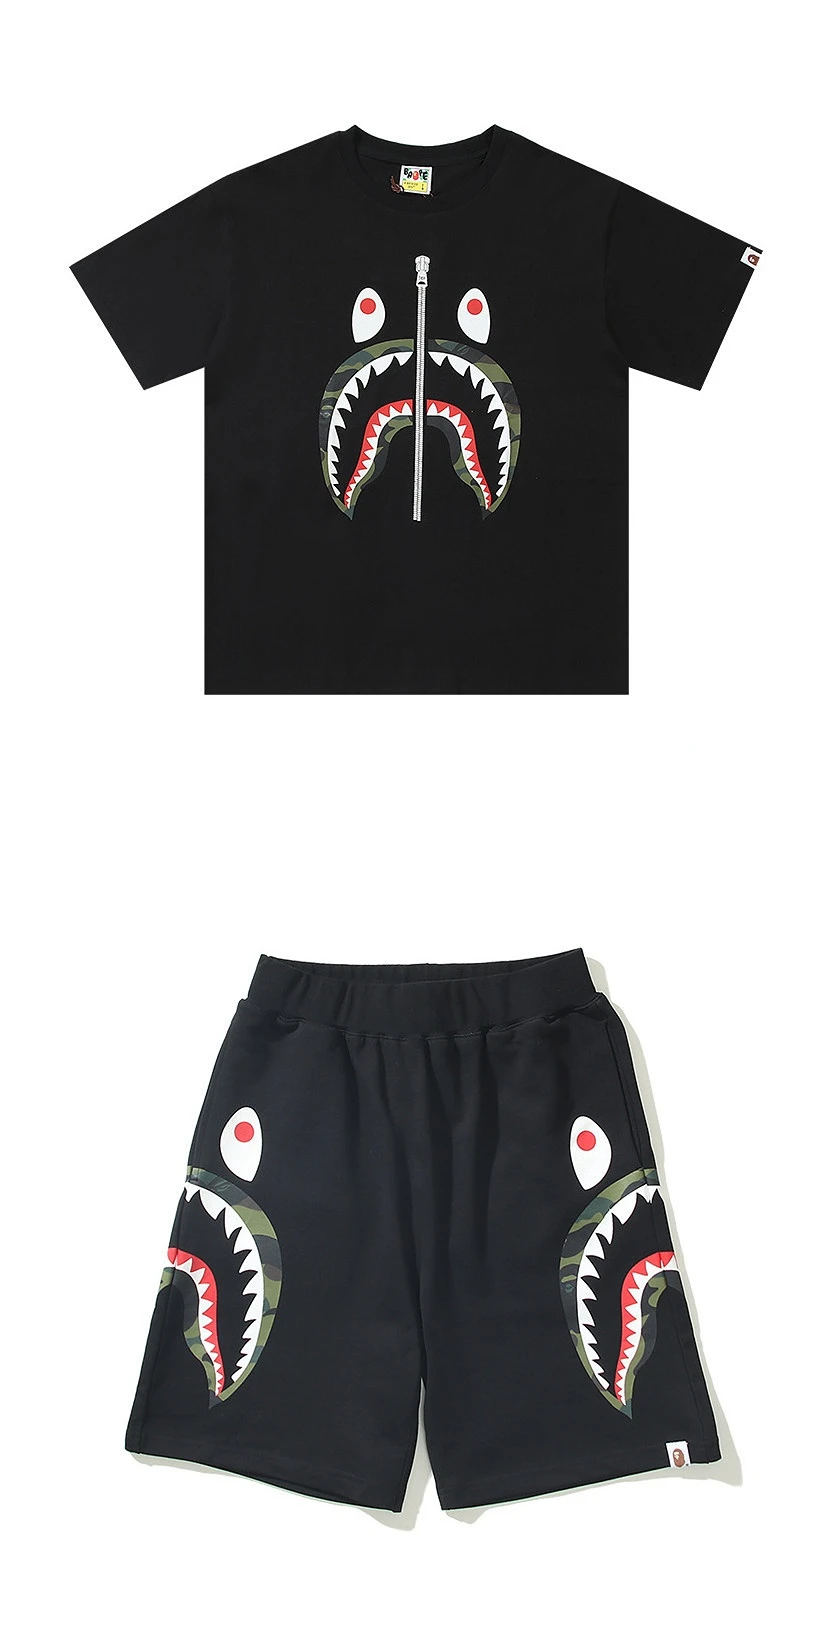 New Trendy Shark Head Short-Sleeved Suit Summer Beach Shorts T-Shirt Casual Suit 3D Printing Men And Women Couple Wear